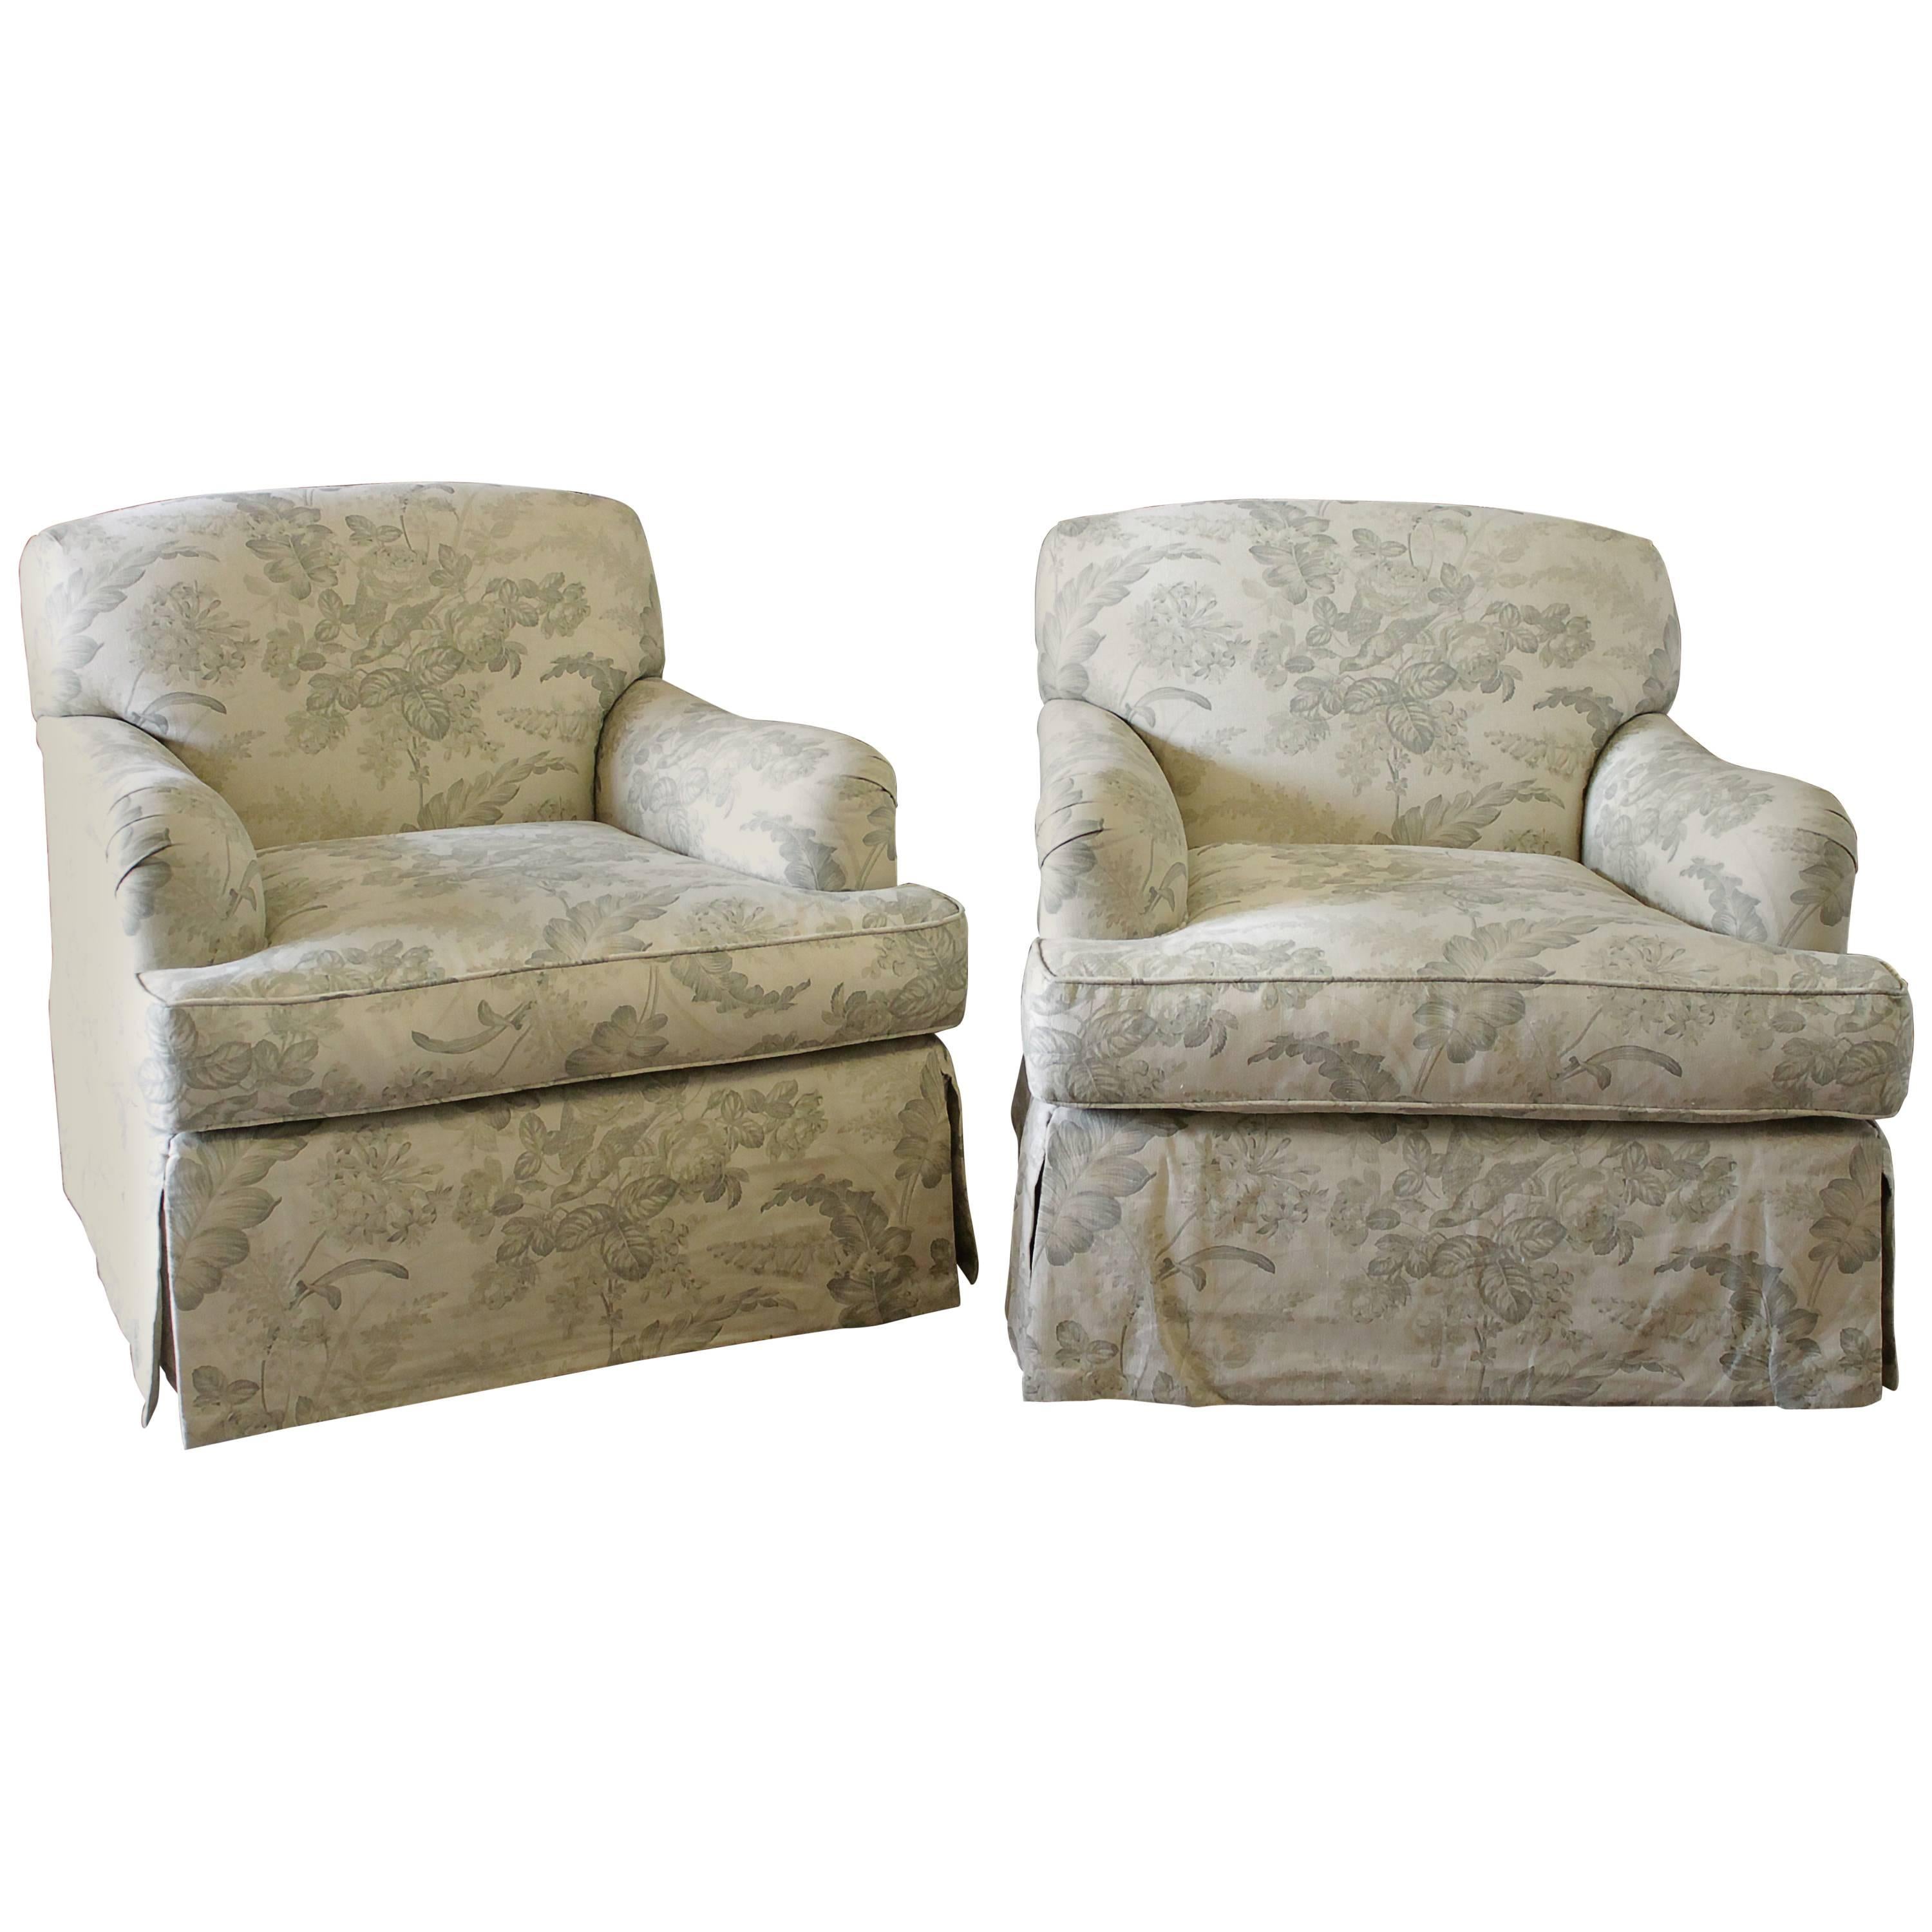 Pair of Modern English Roll Arm Swivel Chairs in French Toile Linen Upholstery